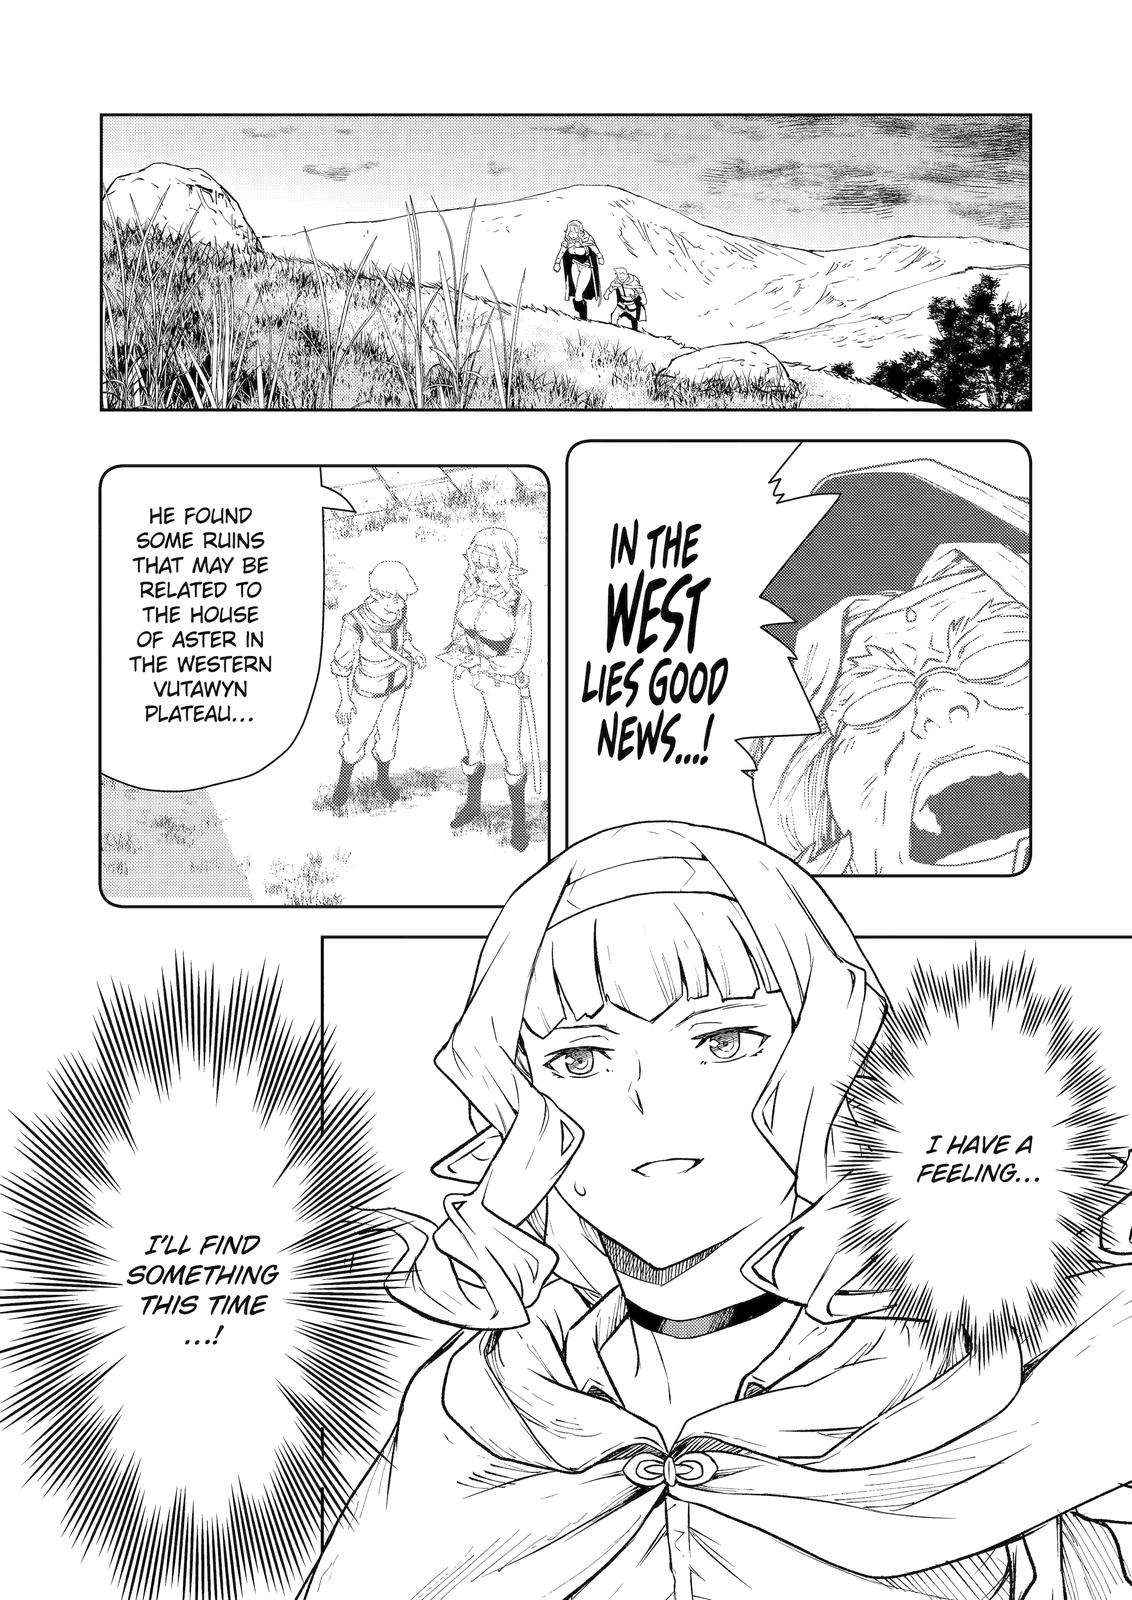 Even The Captain Knight, Miss Elf, Wants To Be A Maiden. - Page 2